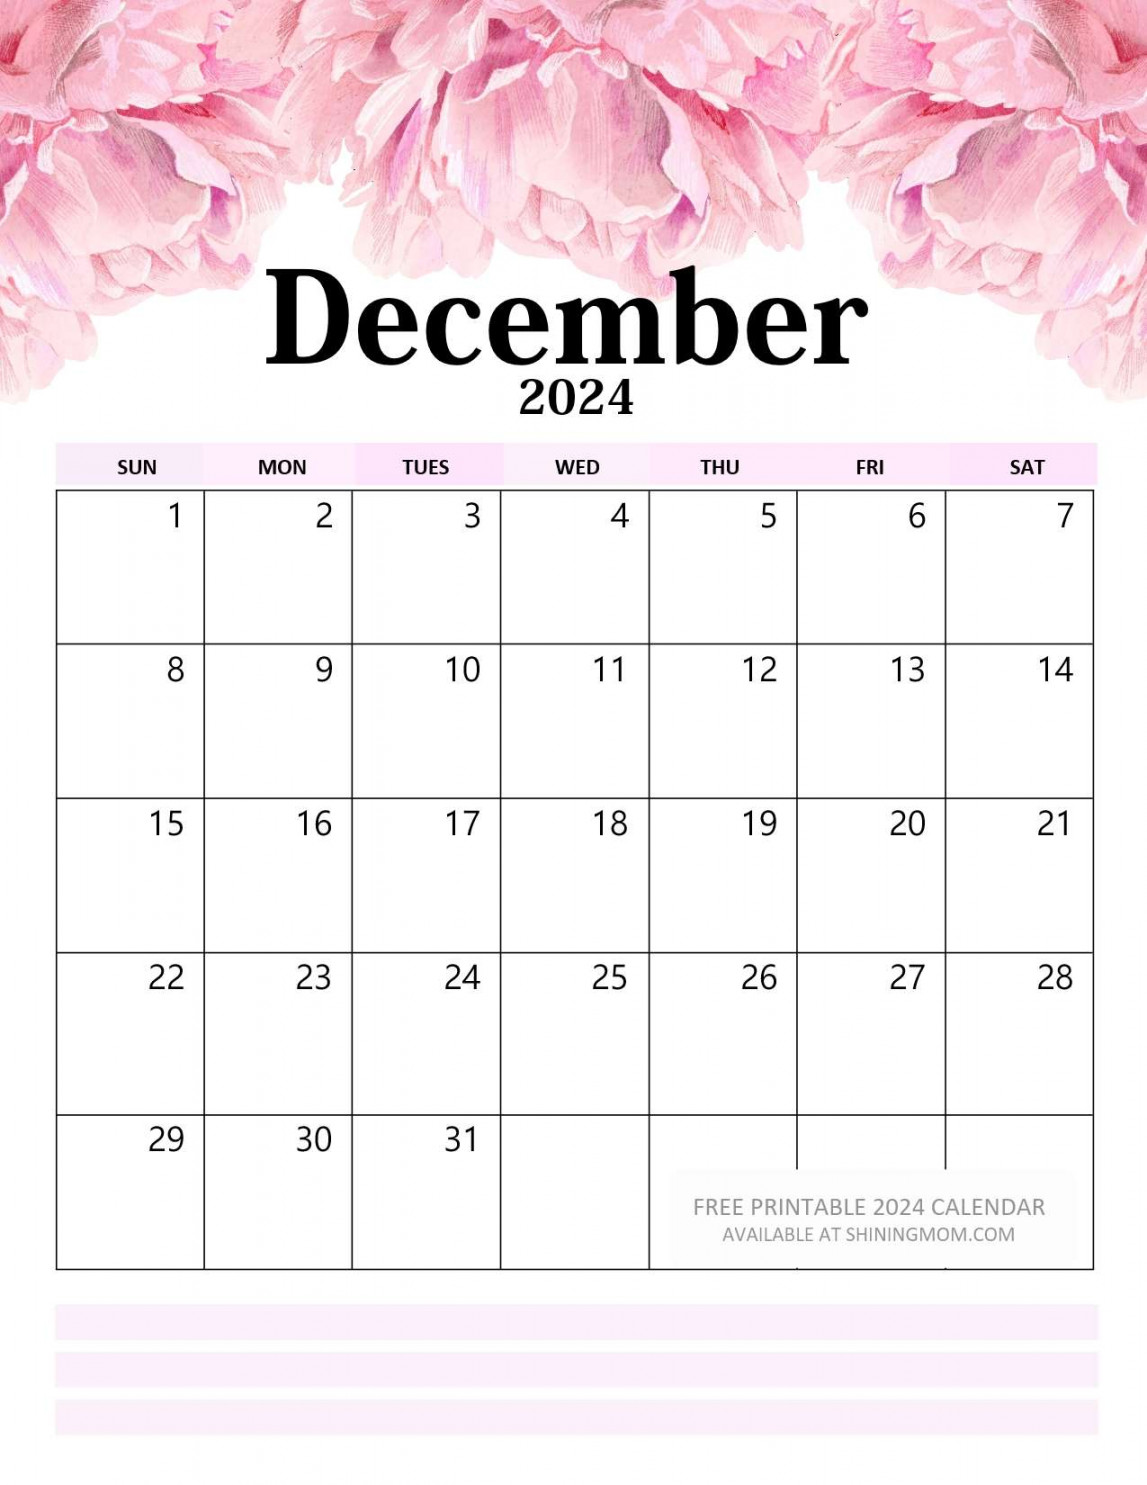 Your Free  Floral Calendar Printable is Here!